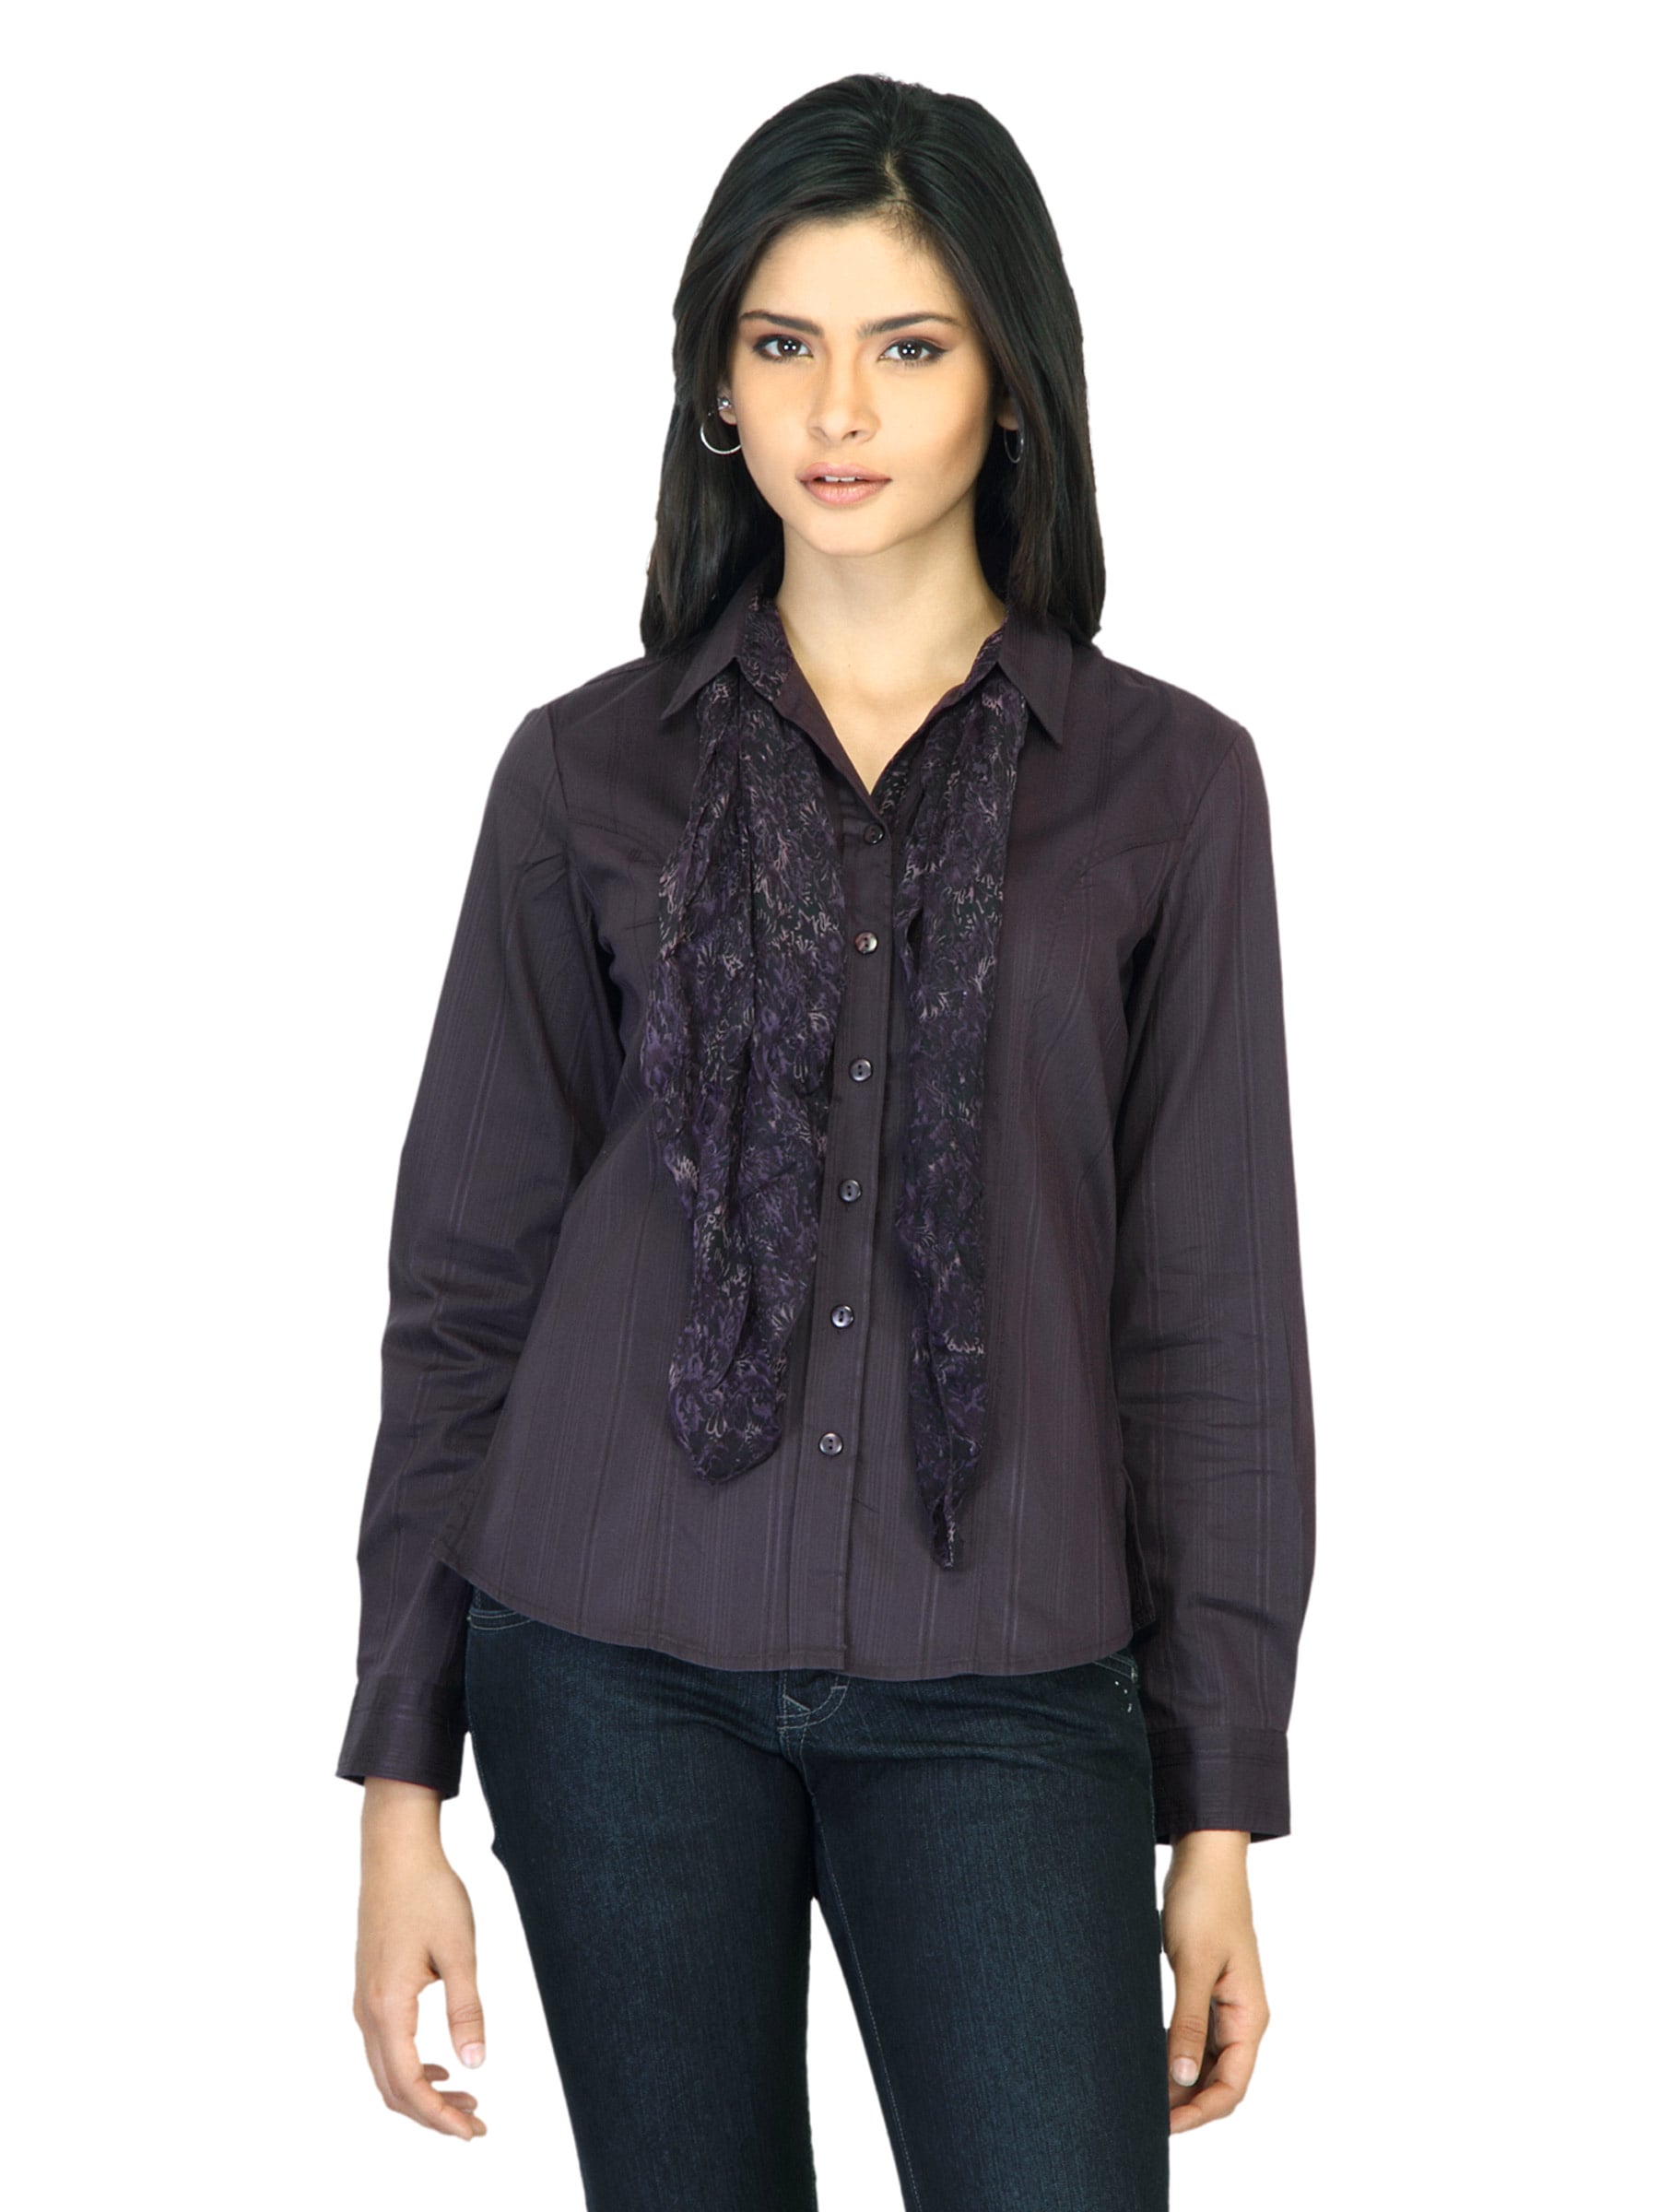 Scullers For Her Striped Purple Shirt